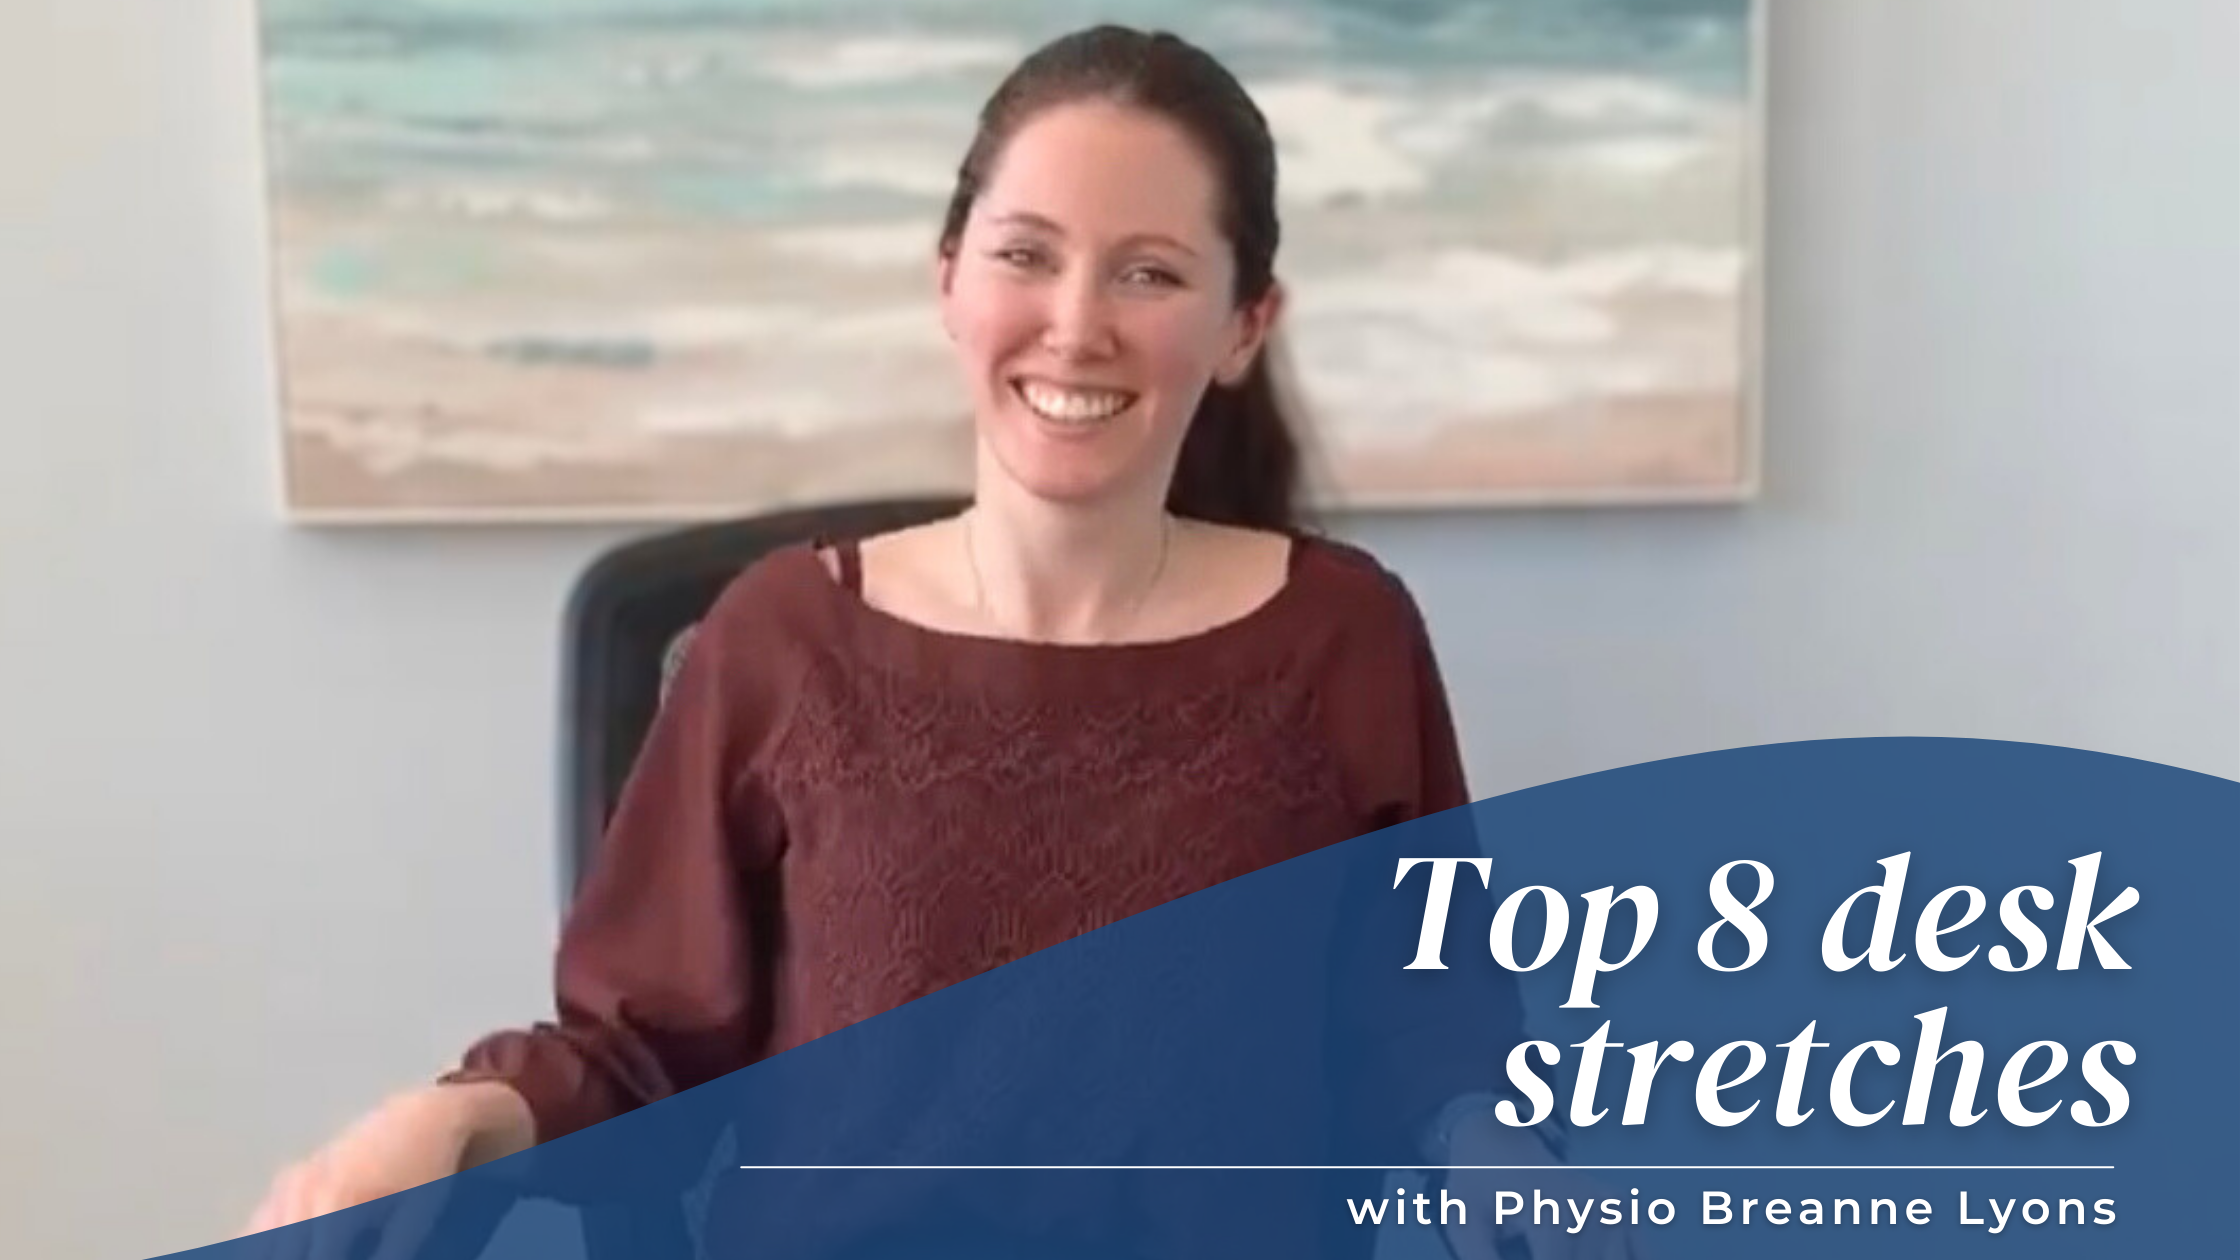 Top 10 Exercises and Stretches for Rotator Cuff Injury  Blog by CB  Physiotherapy, Active Healing for Pain Free Life.